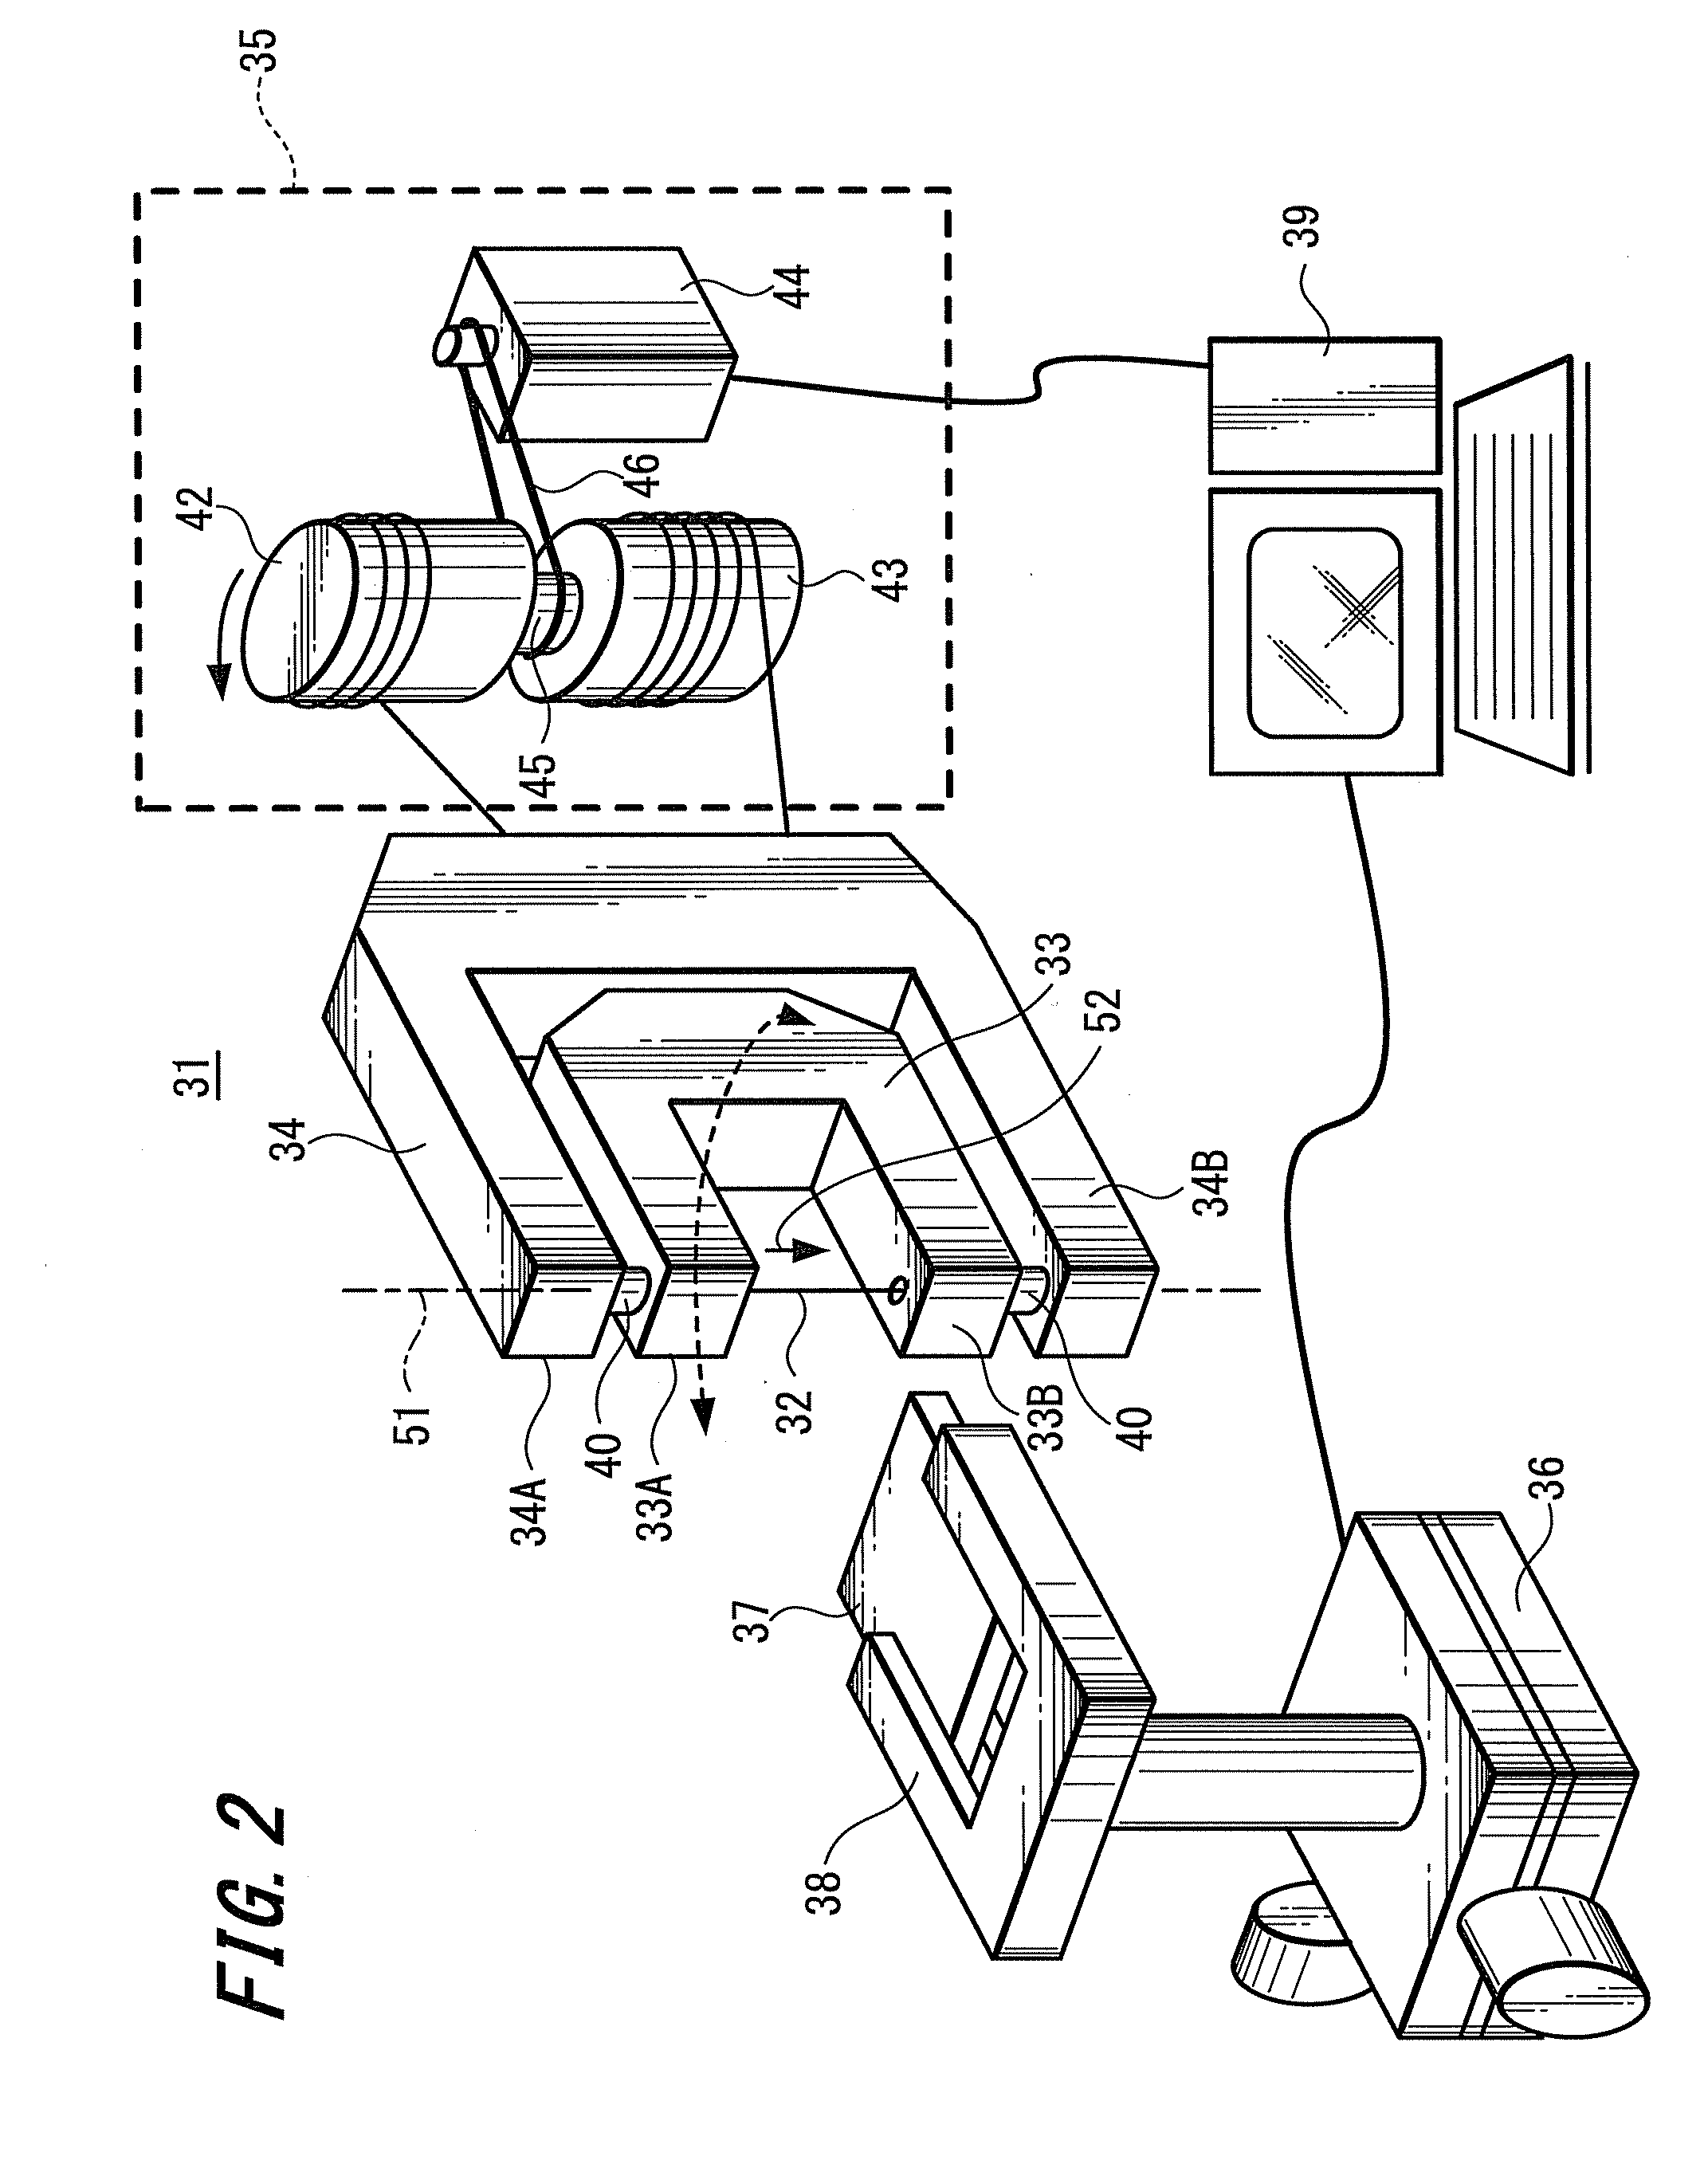 Cutting Methods and Cutting Apparatus